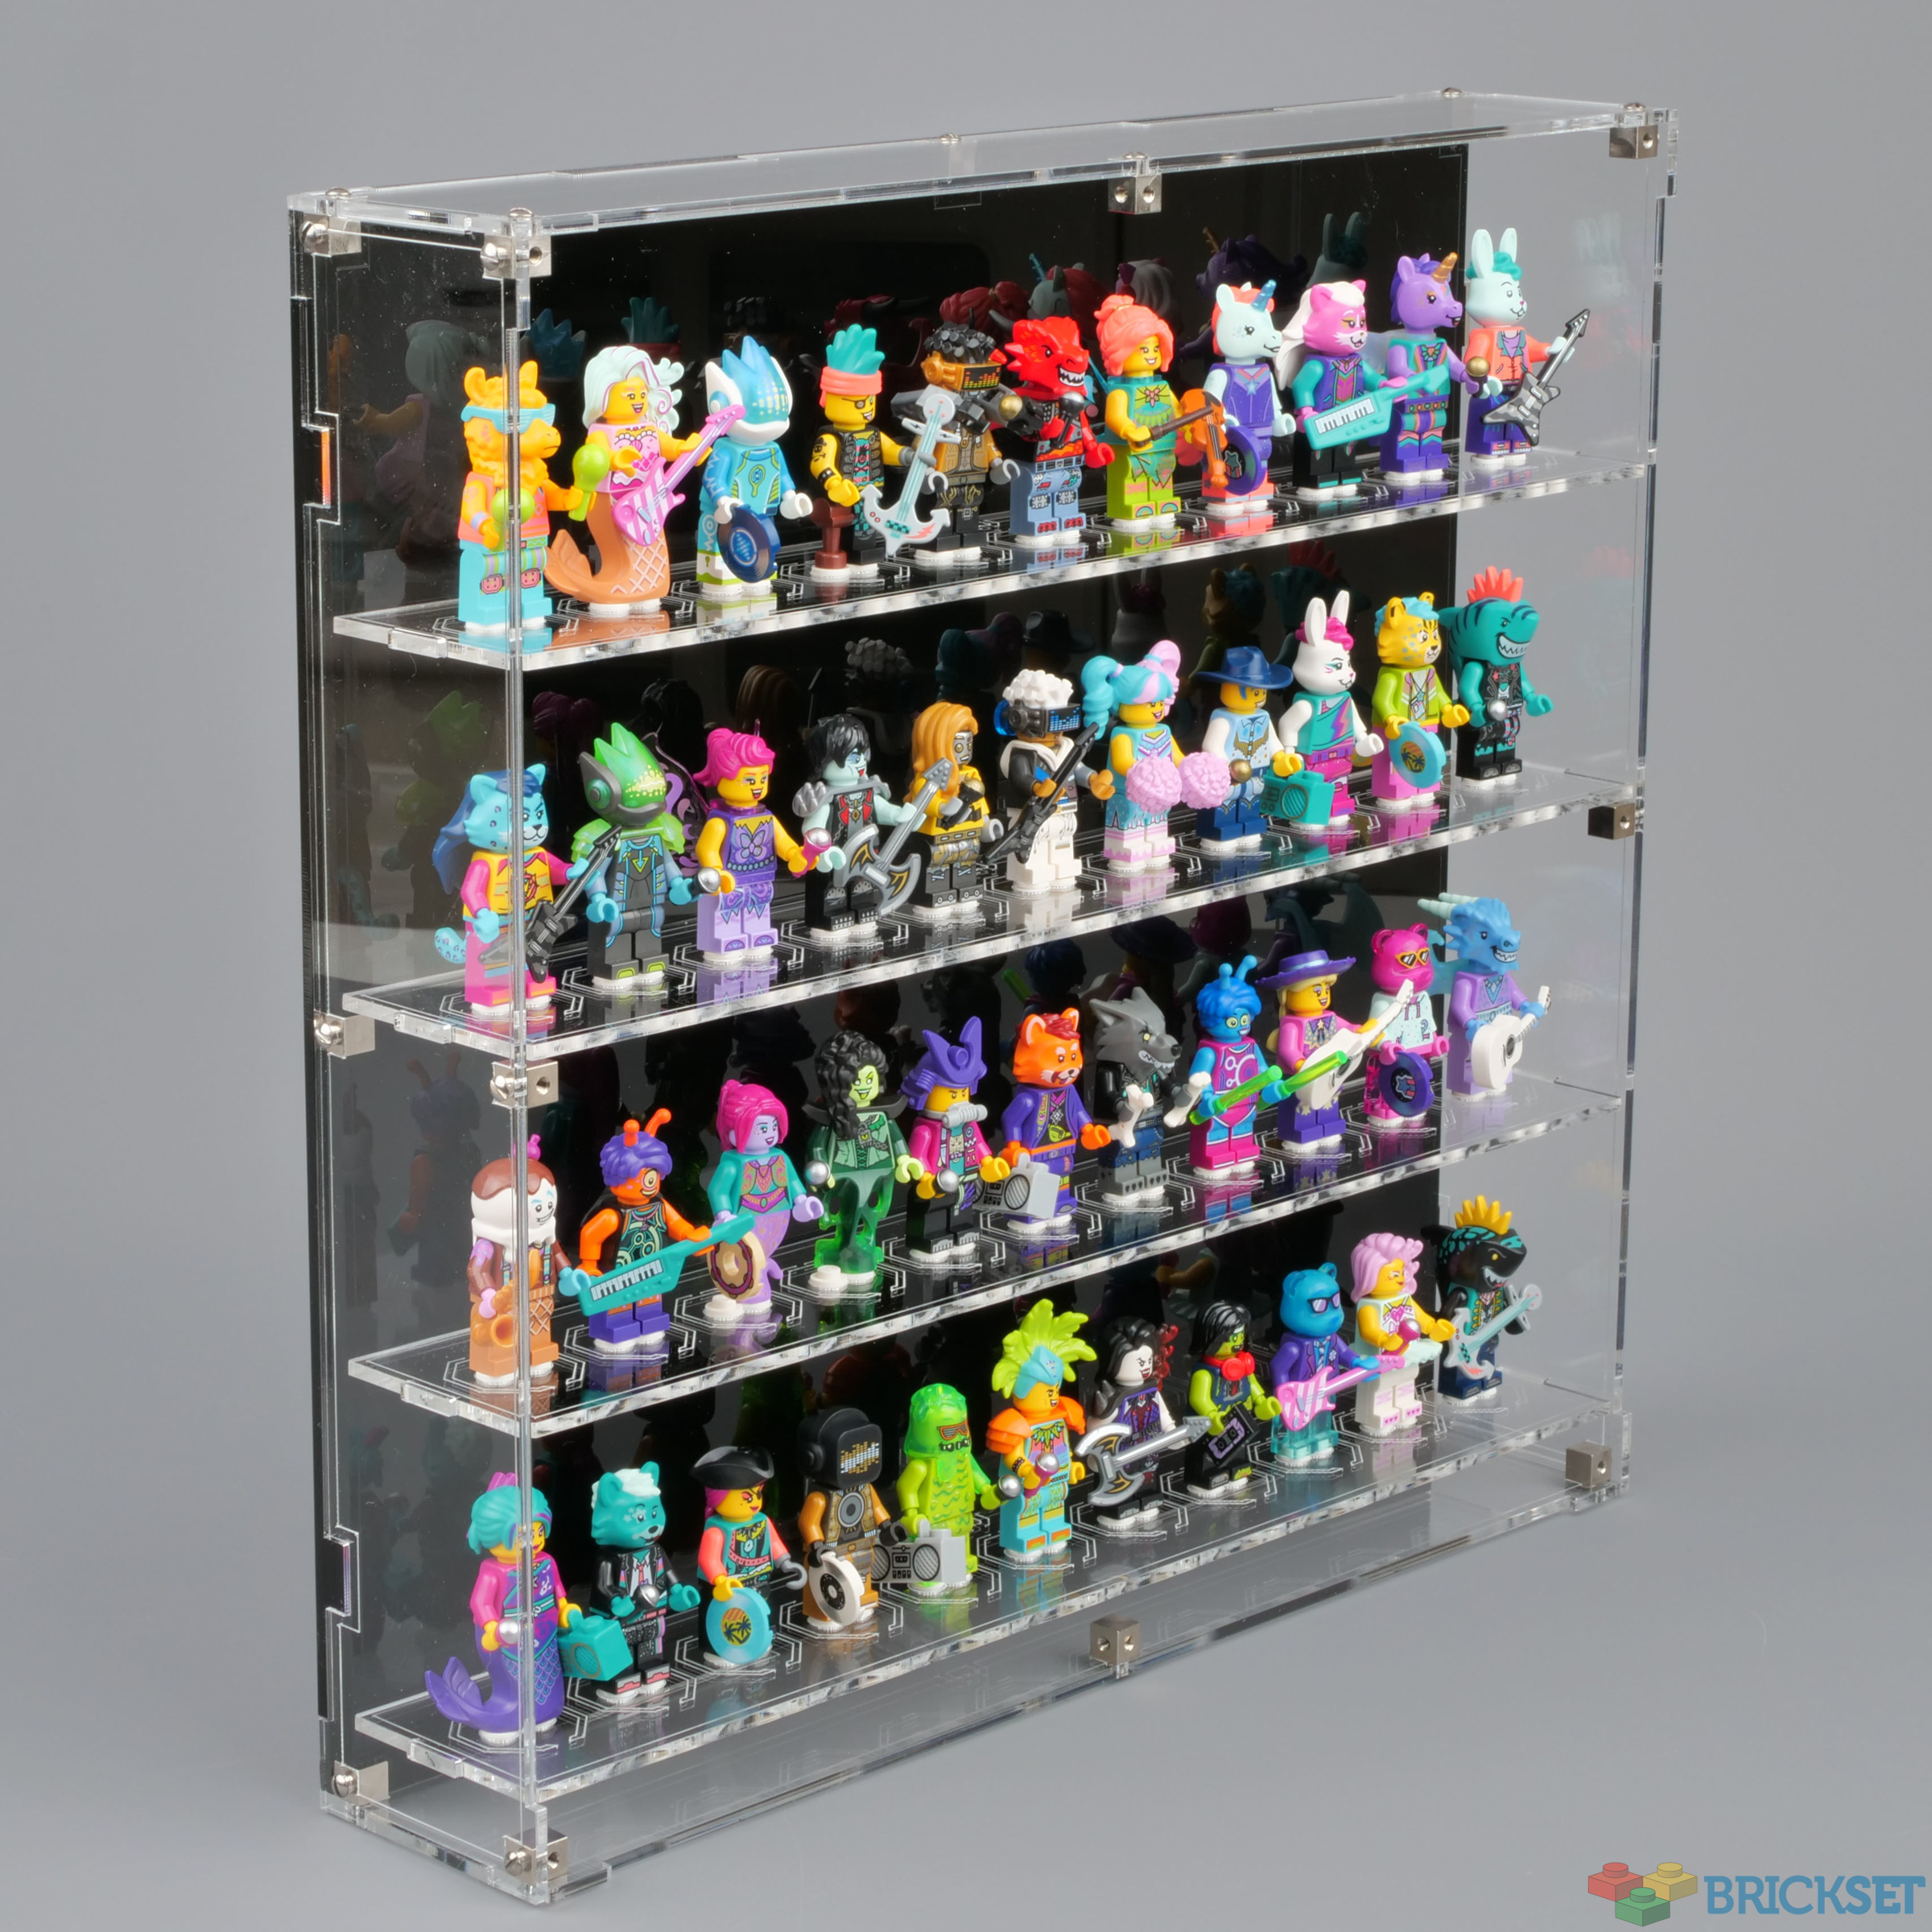 Lego Wicked Brick Wall Mounted Minifig Display Cases Review Brickset